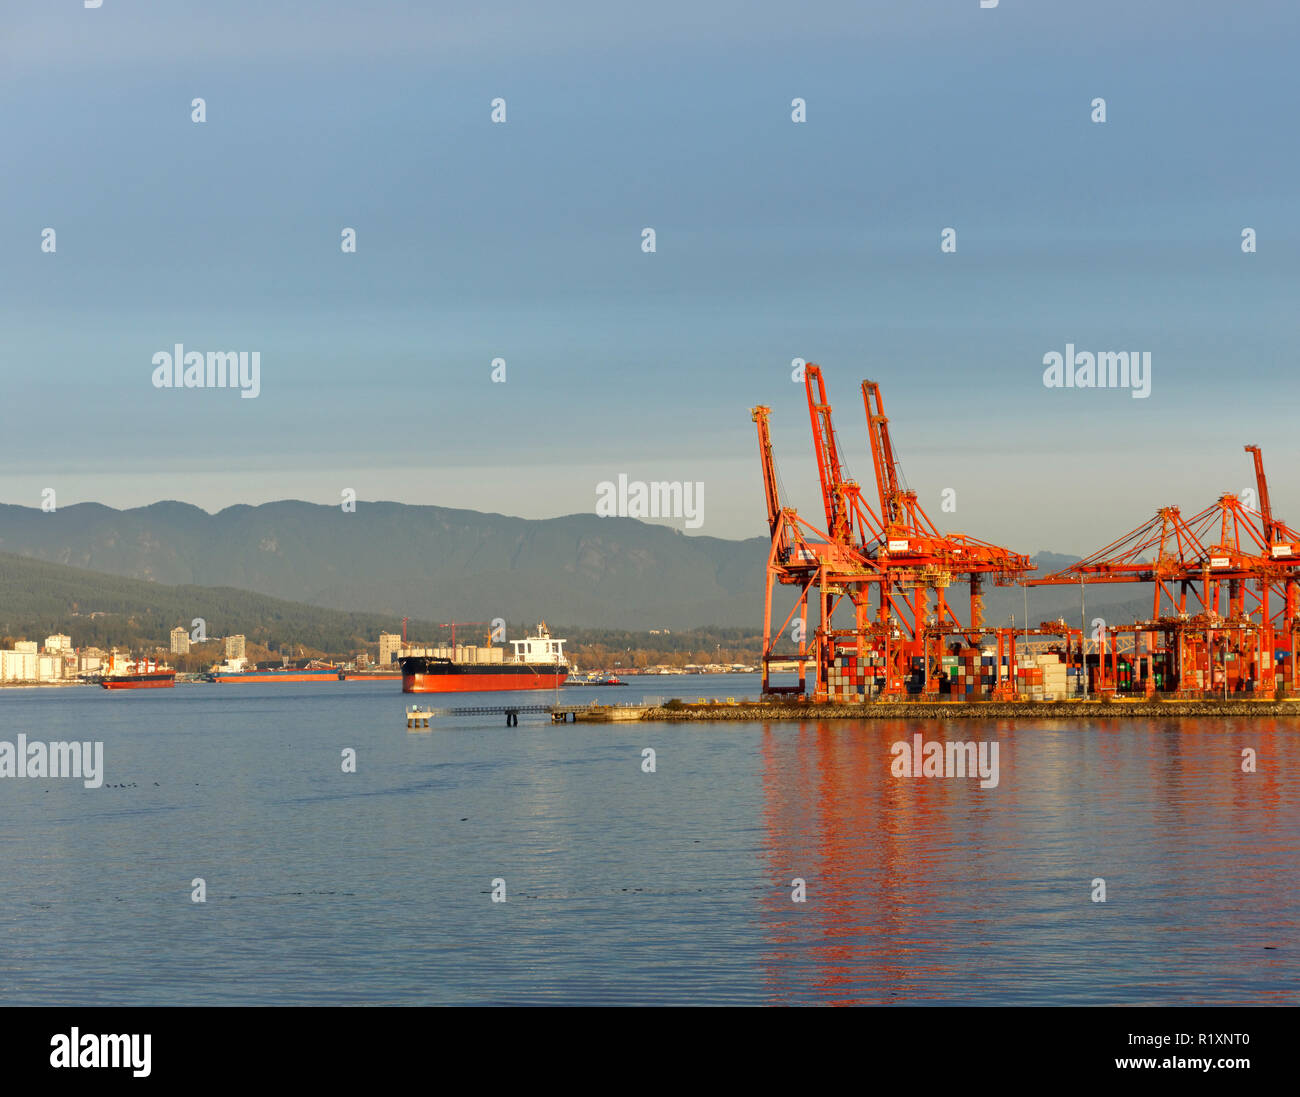 Gantry cranes and container ships in Burrard Inlet, Port of Vancouver, BC, Canada Stock Photo